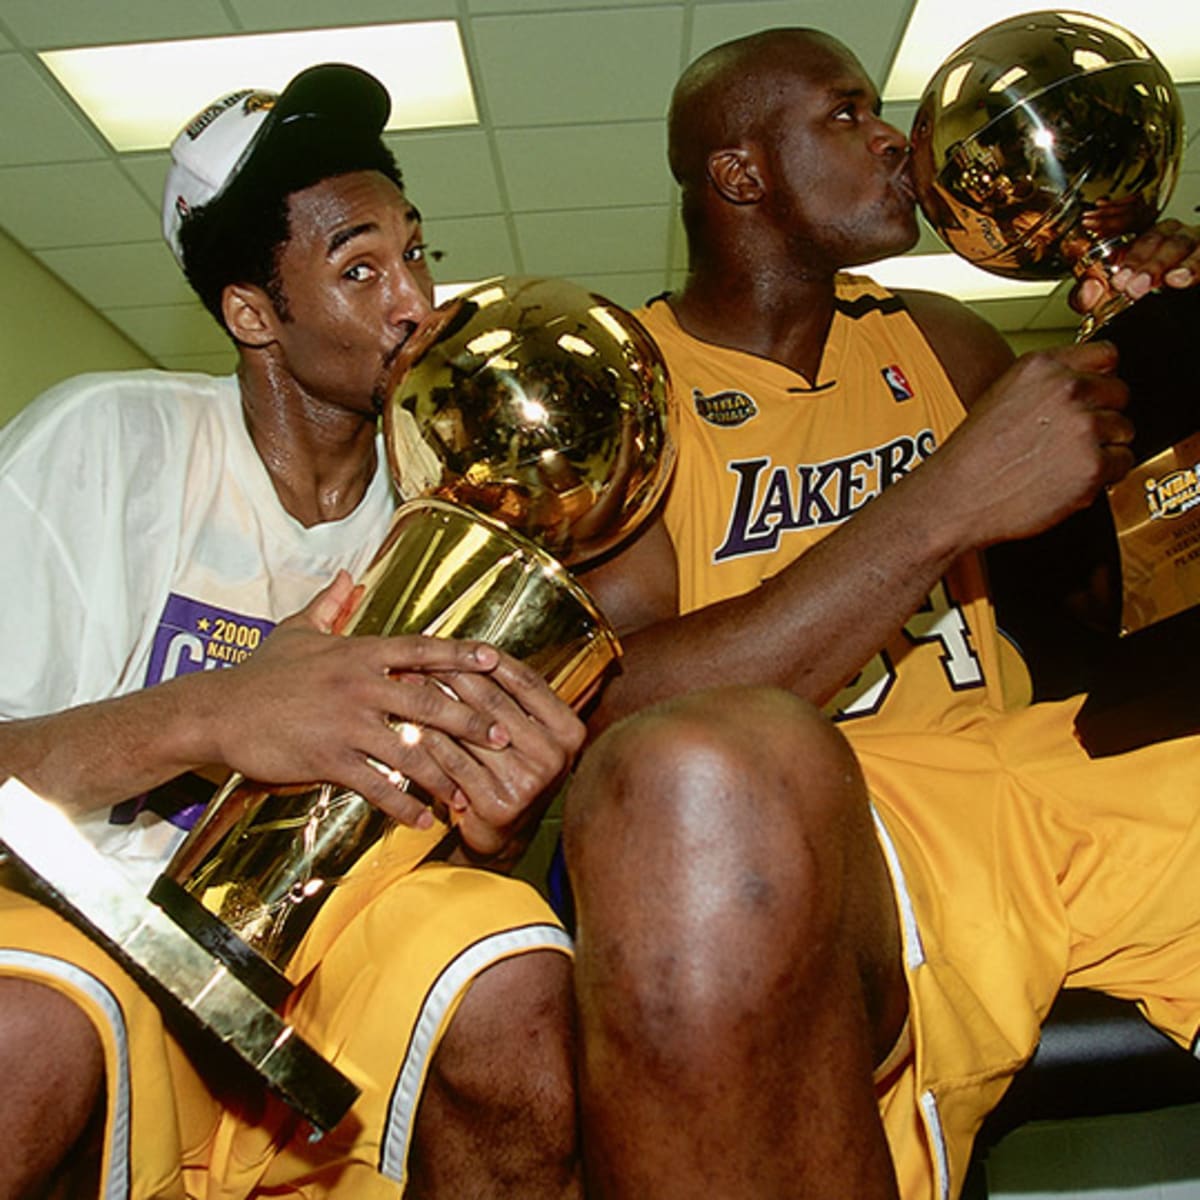 Kobe Bryant holds both the Lakers 2010 NBA Championship trophy and the 2010 NBA  Finals trophy.